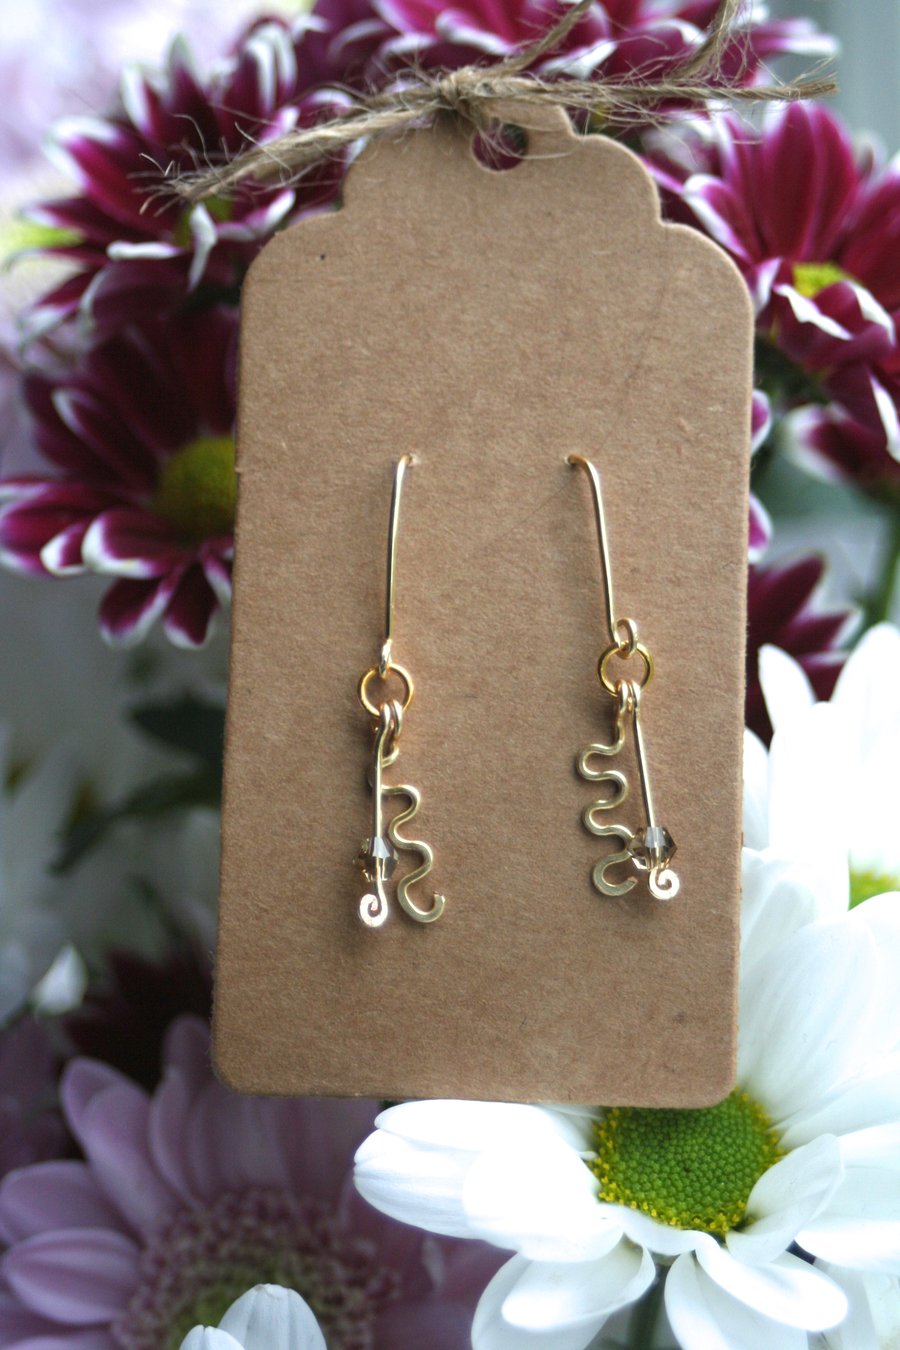 Gold plated curvy earrings